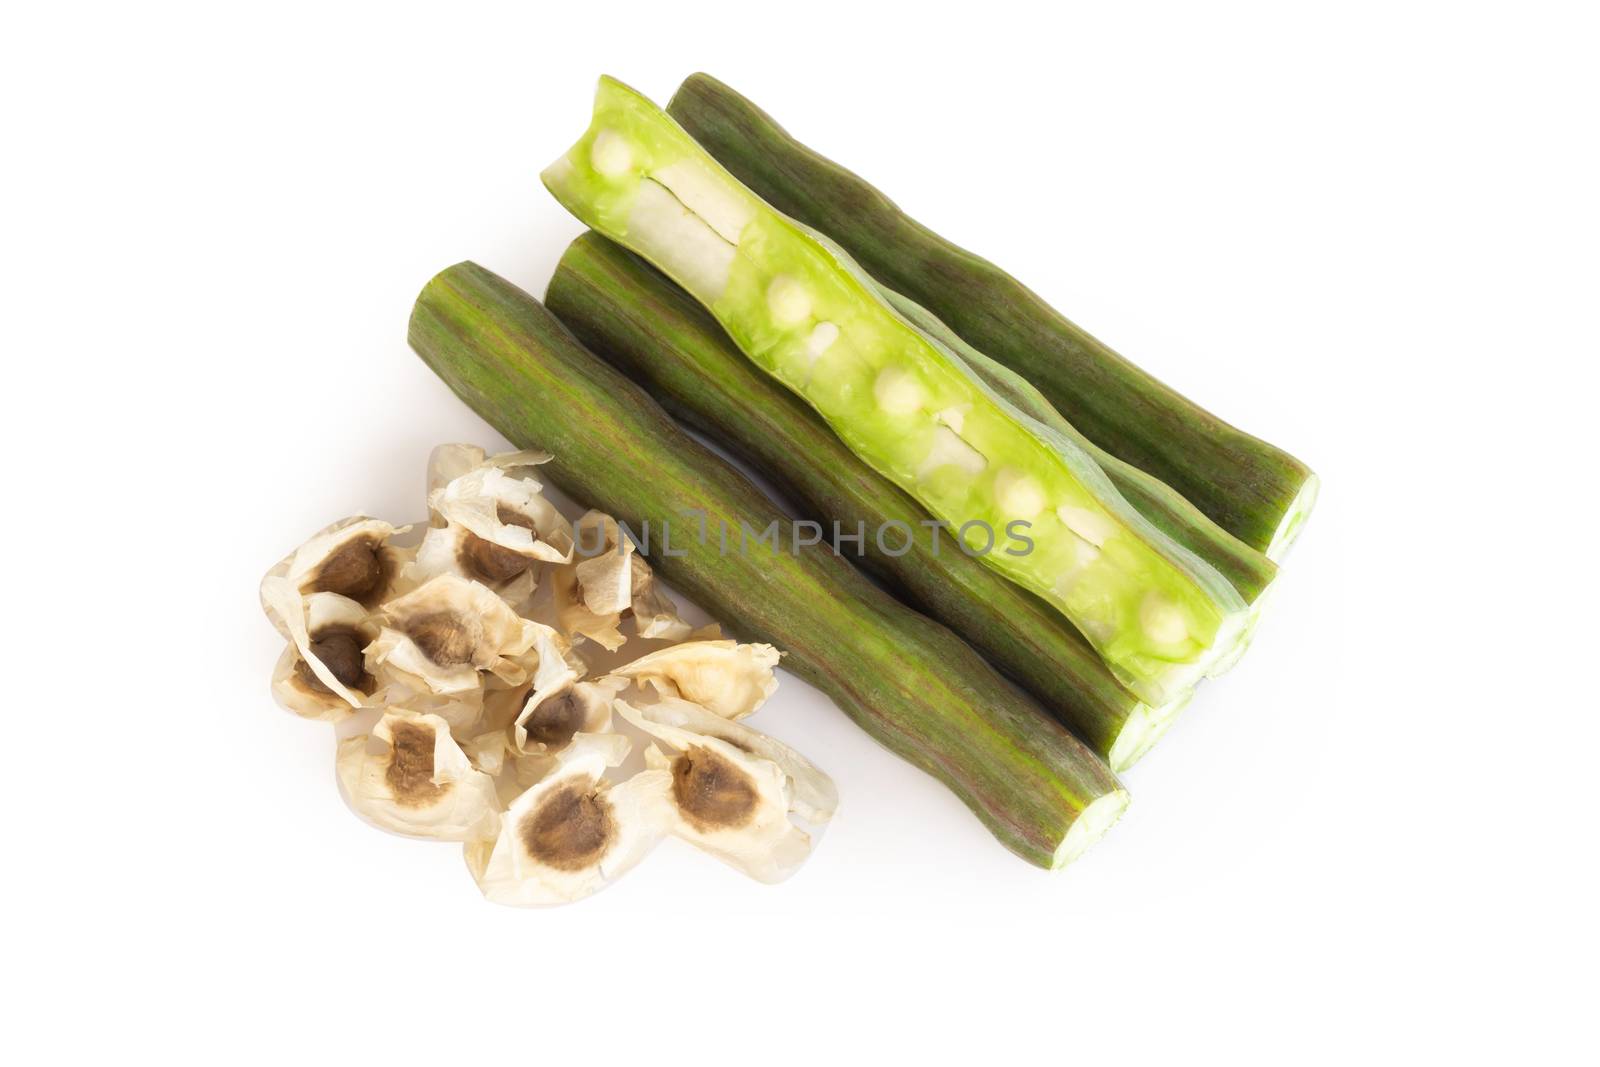 Moringa seeds and pods isolated on white background, herb and medical concept